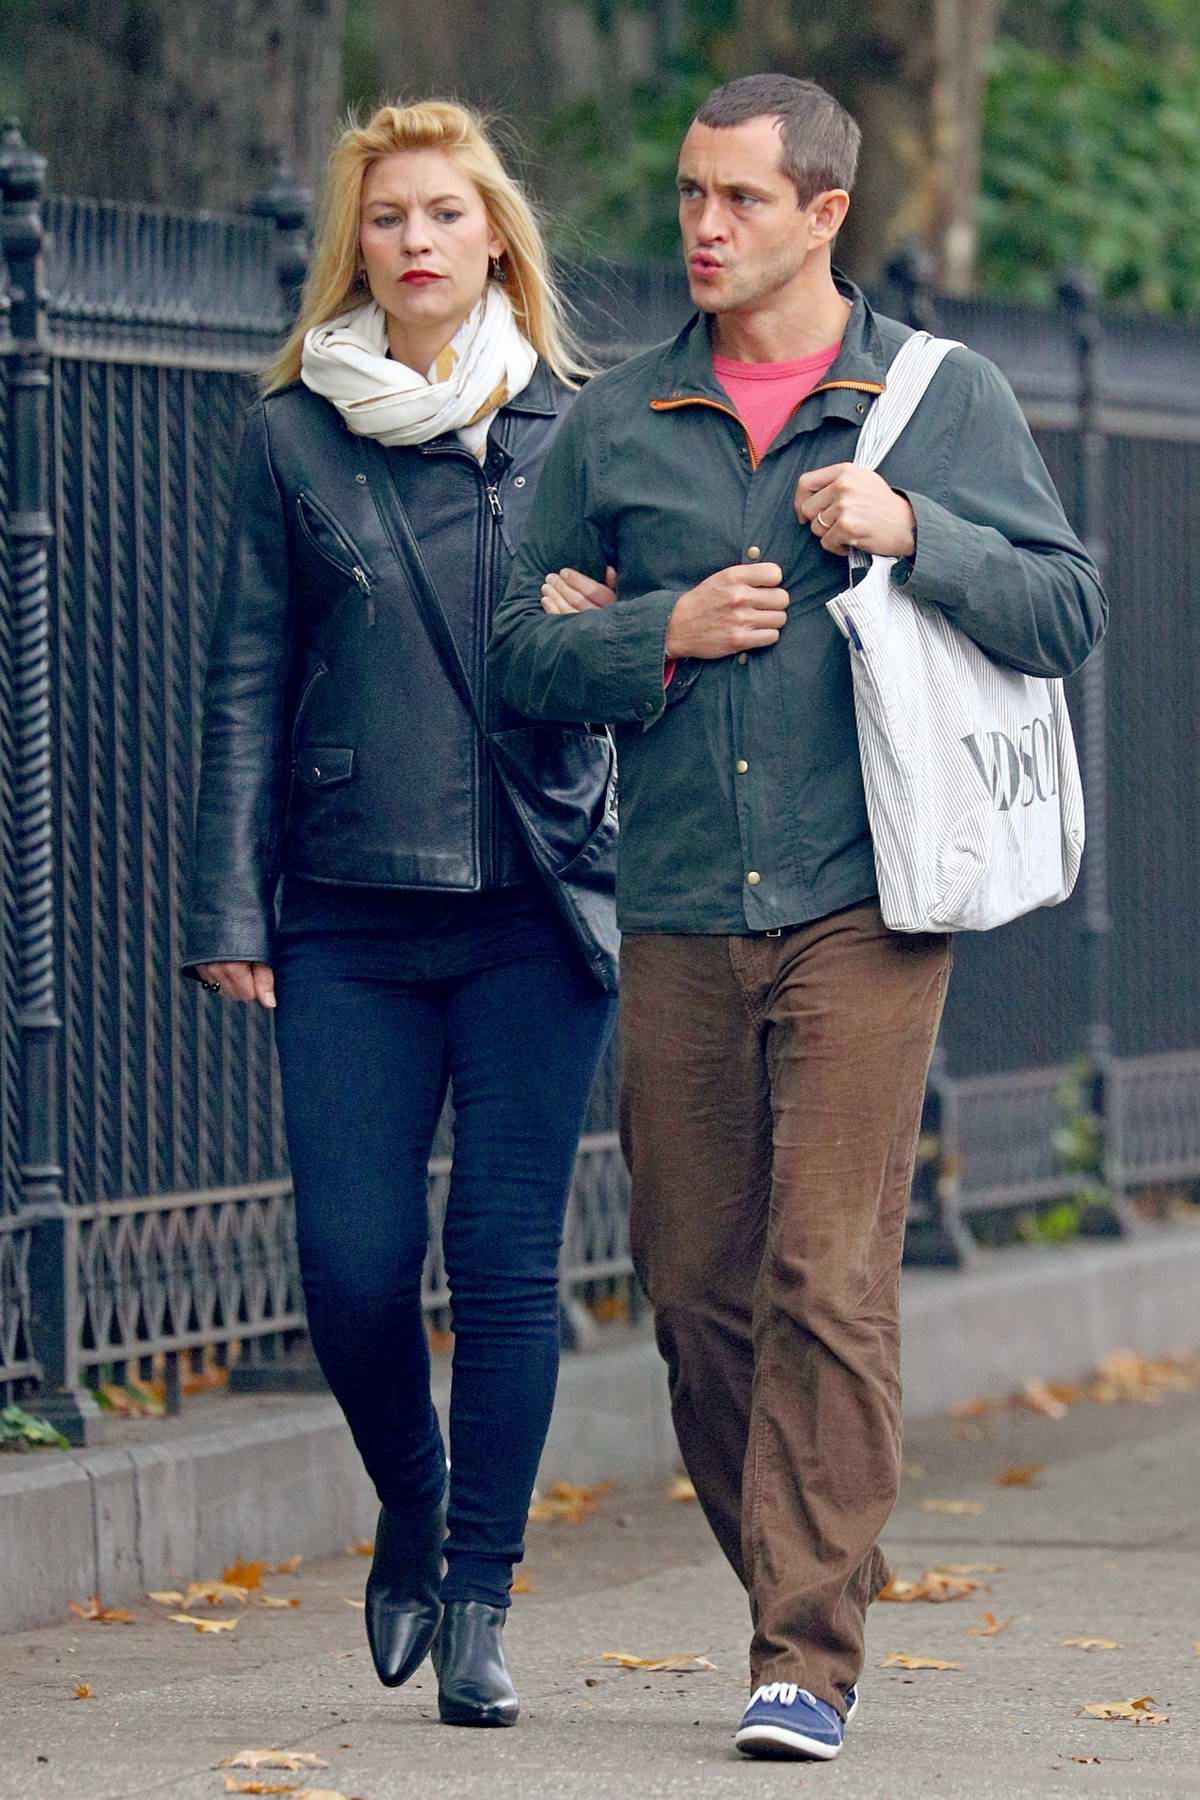 Claire Danes And Hugh Dancy Stroll Around After Grabbing Lunch In New York City